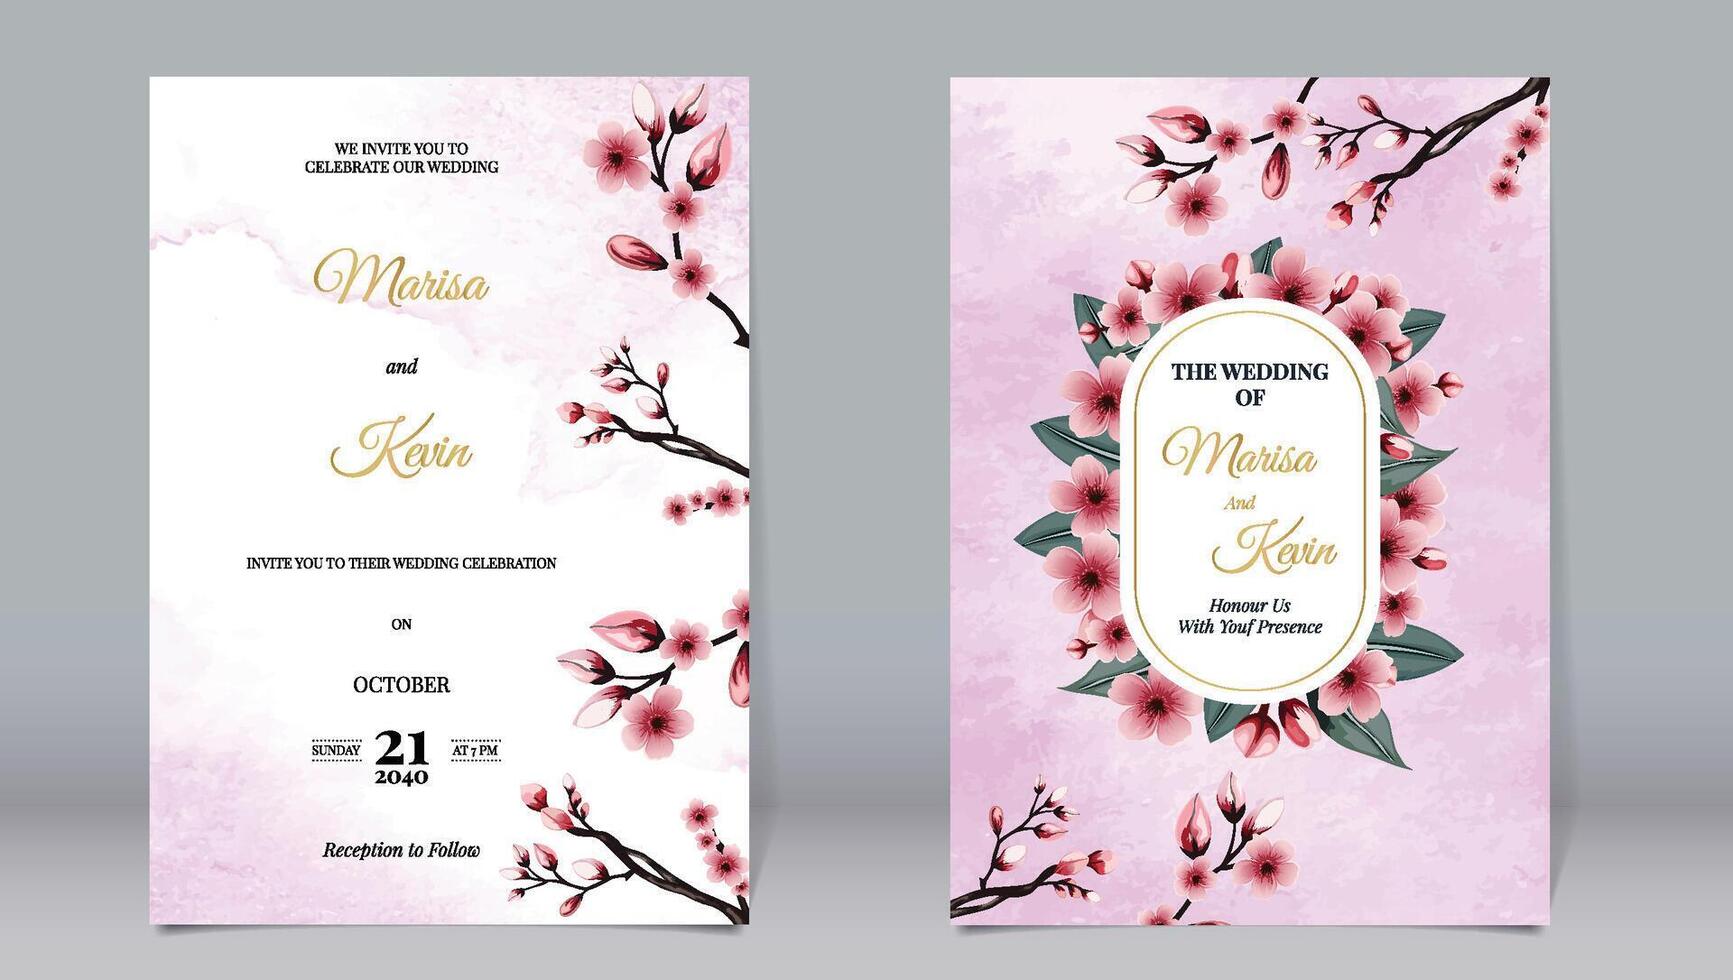 Luxury wedding invitation cherry blossom decoration and golden oval elements on pink watercolor background vector